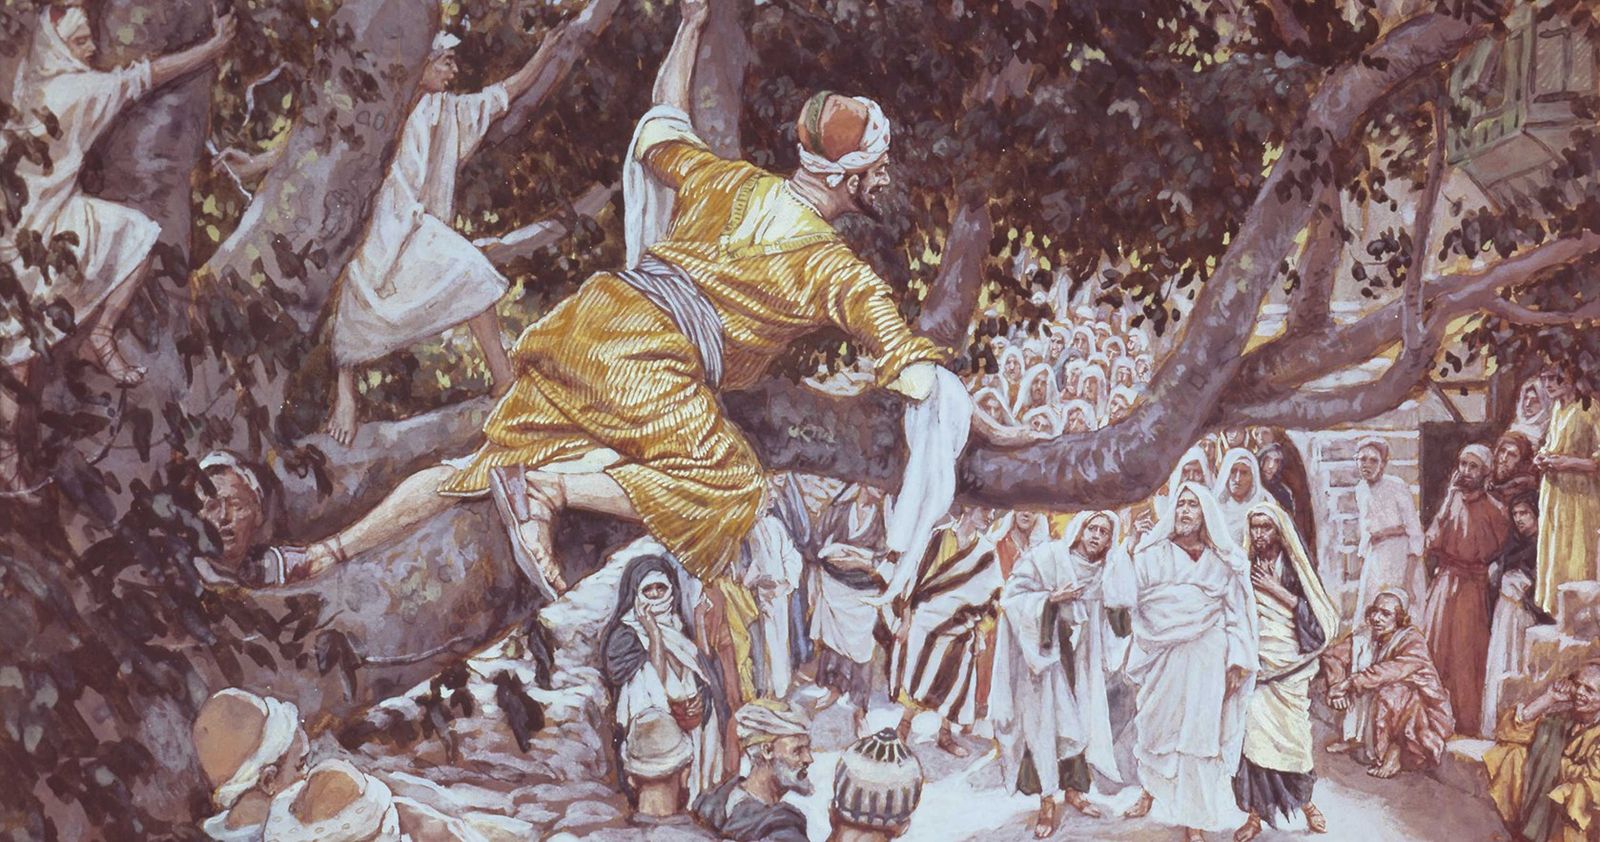 Jesus Christ, thronged by a crowd of people, walking  through the streets of Jericho.  Christ is looking  up into a sycamore tree at Zacchaeus, the publican. Christ is beckoning to Zacchaeus.  Other people are also in the tree.   The painting illustrates the event wherein Zacchaeus, because he was short in physical stature, climbed a sycamore tree in order to see Christ in the midst of a large crowd.  Christ noticed Zacchaeus and chose  to spend the day with him, despite the cricitism of  the crowd that Zacchaeus was the chief of the publicans in Jericho.   (Luke 19:1-10)